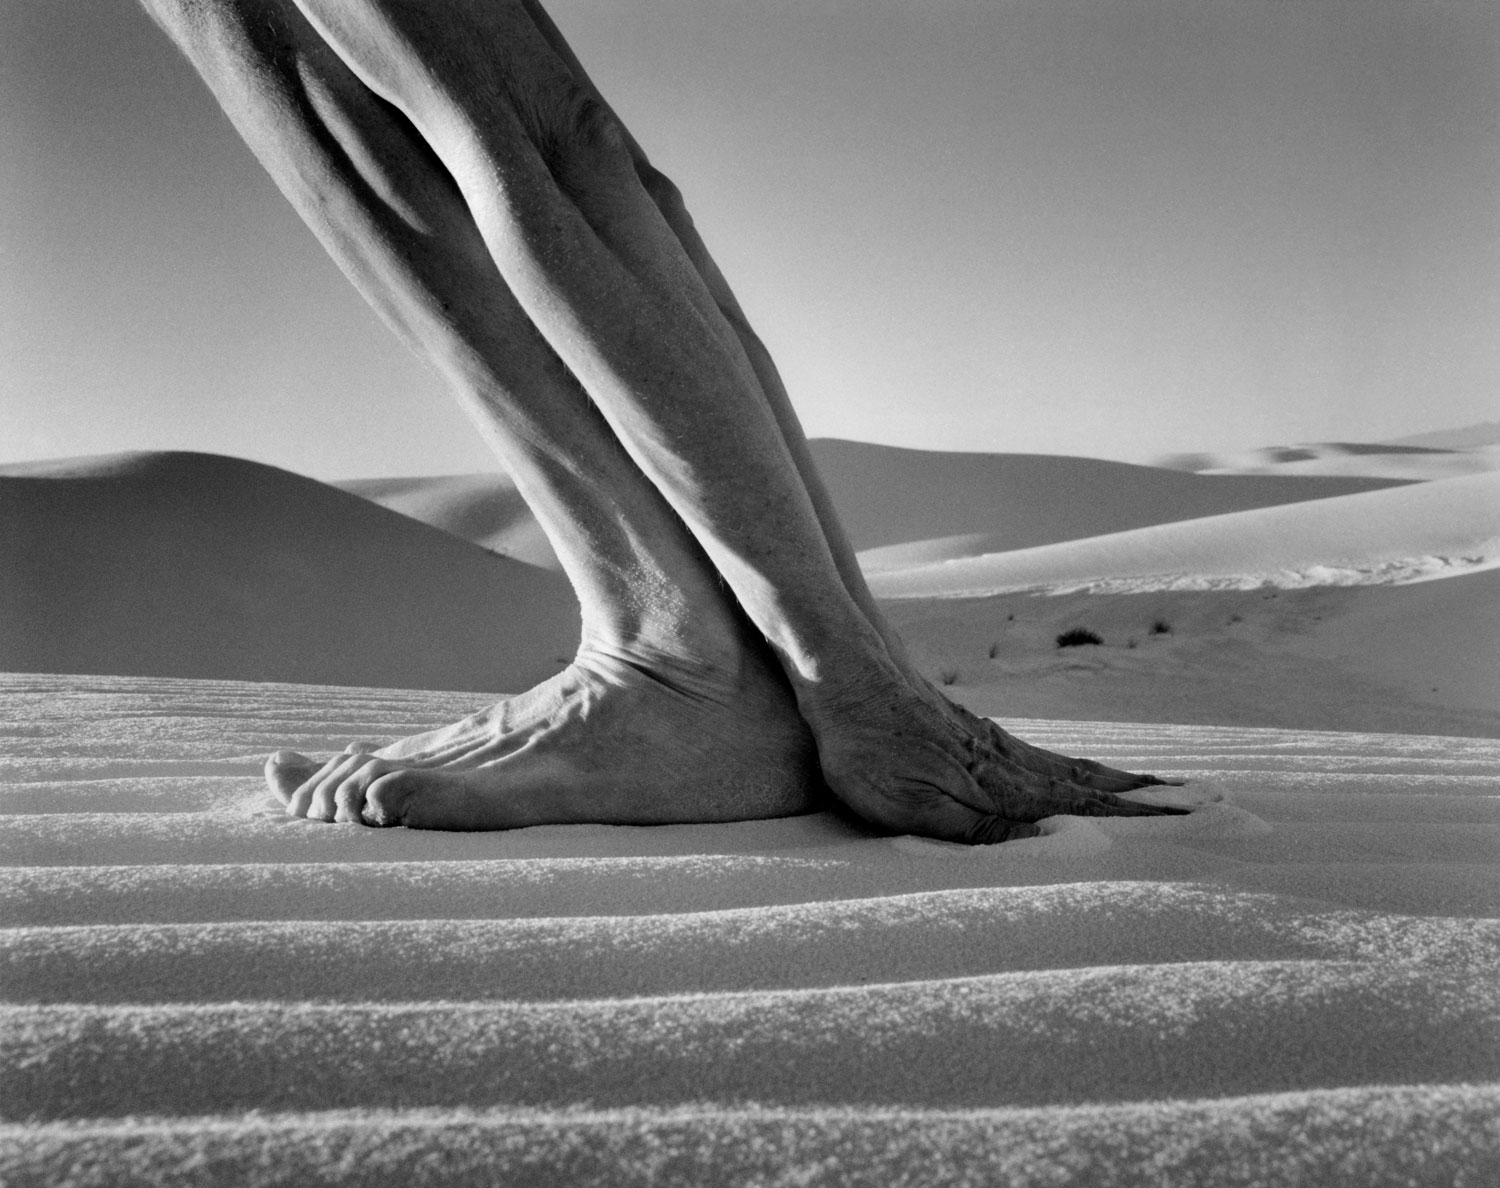 White Sands, New Mexico, 2000